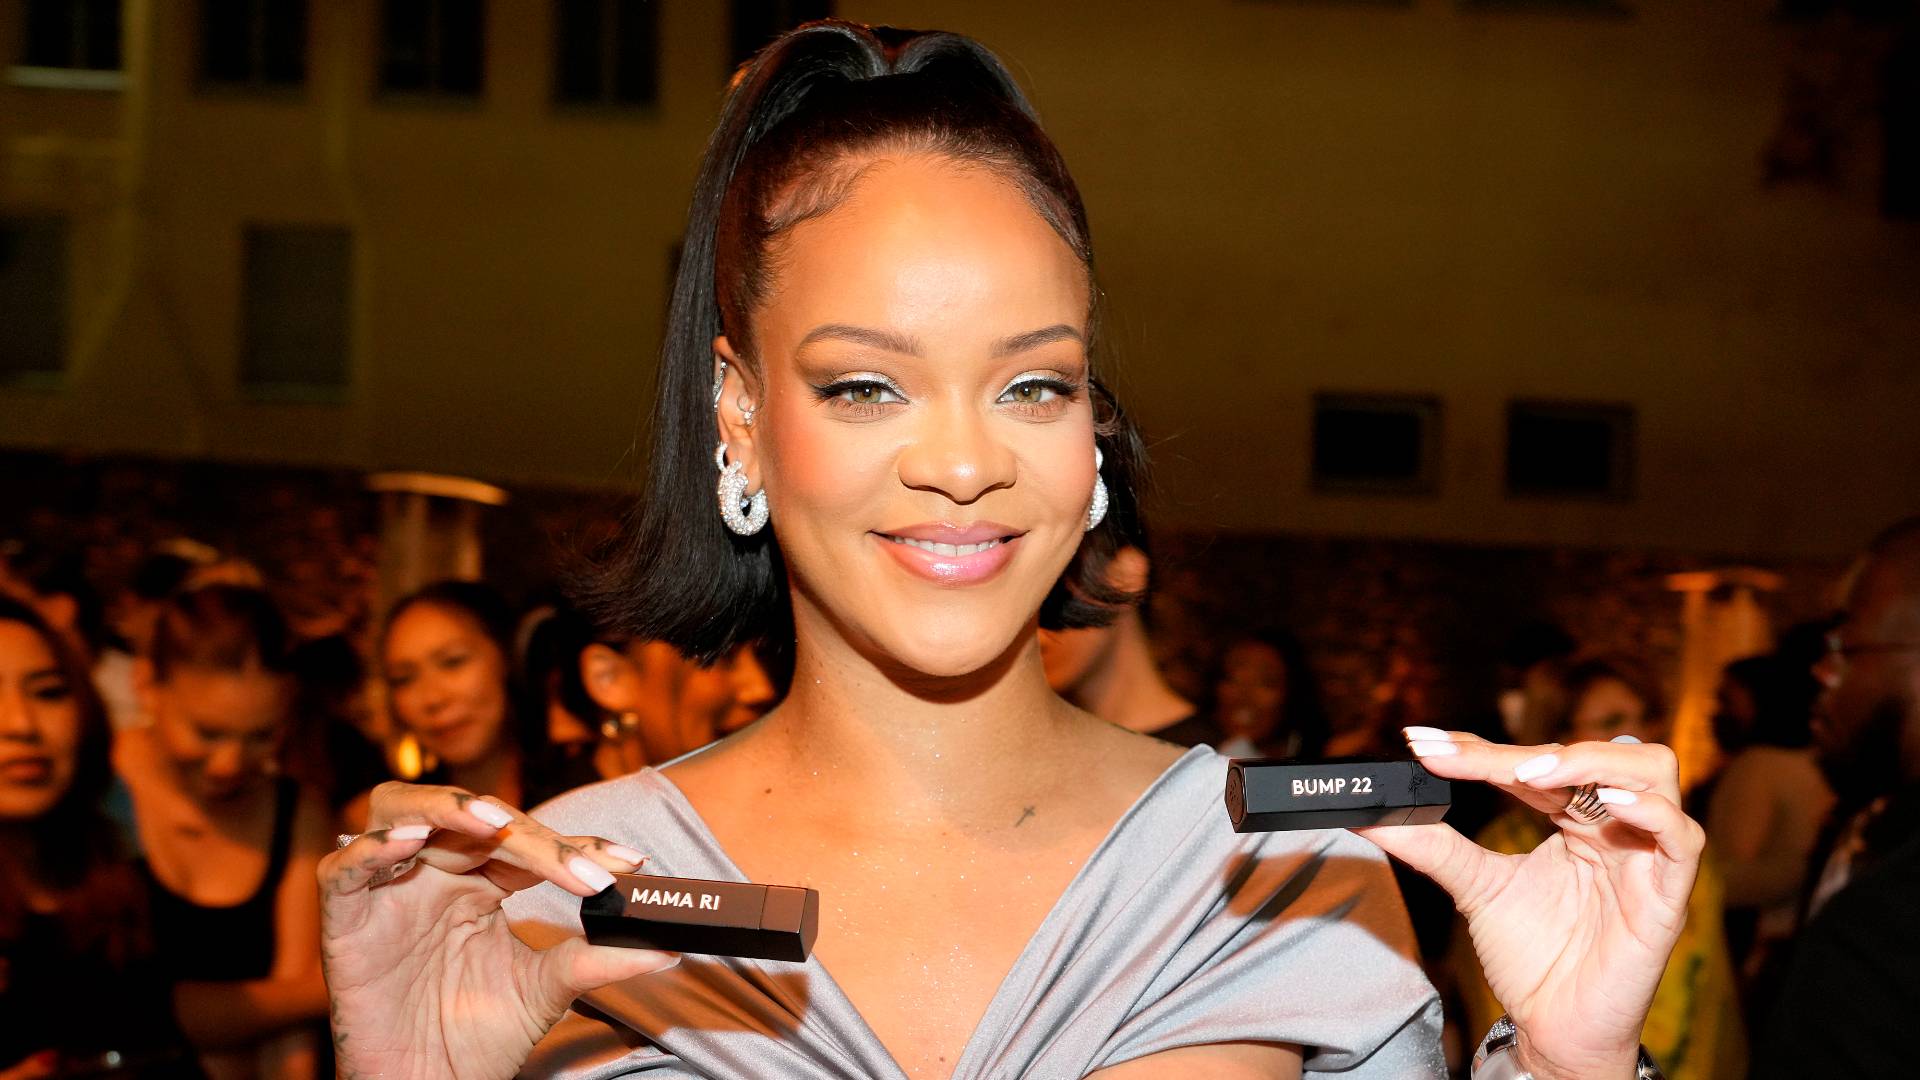 : Rihanna poses with engraved Fenty Beauty ICON Lipsticks as she celebrates the launch of Fenty Beauty at ULTA Beauty on March 12, 2022 in Los Angeles, California. 